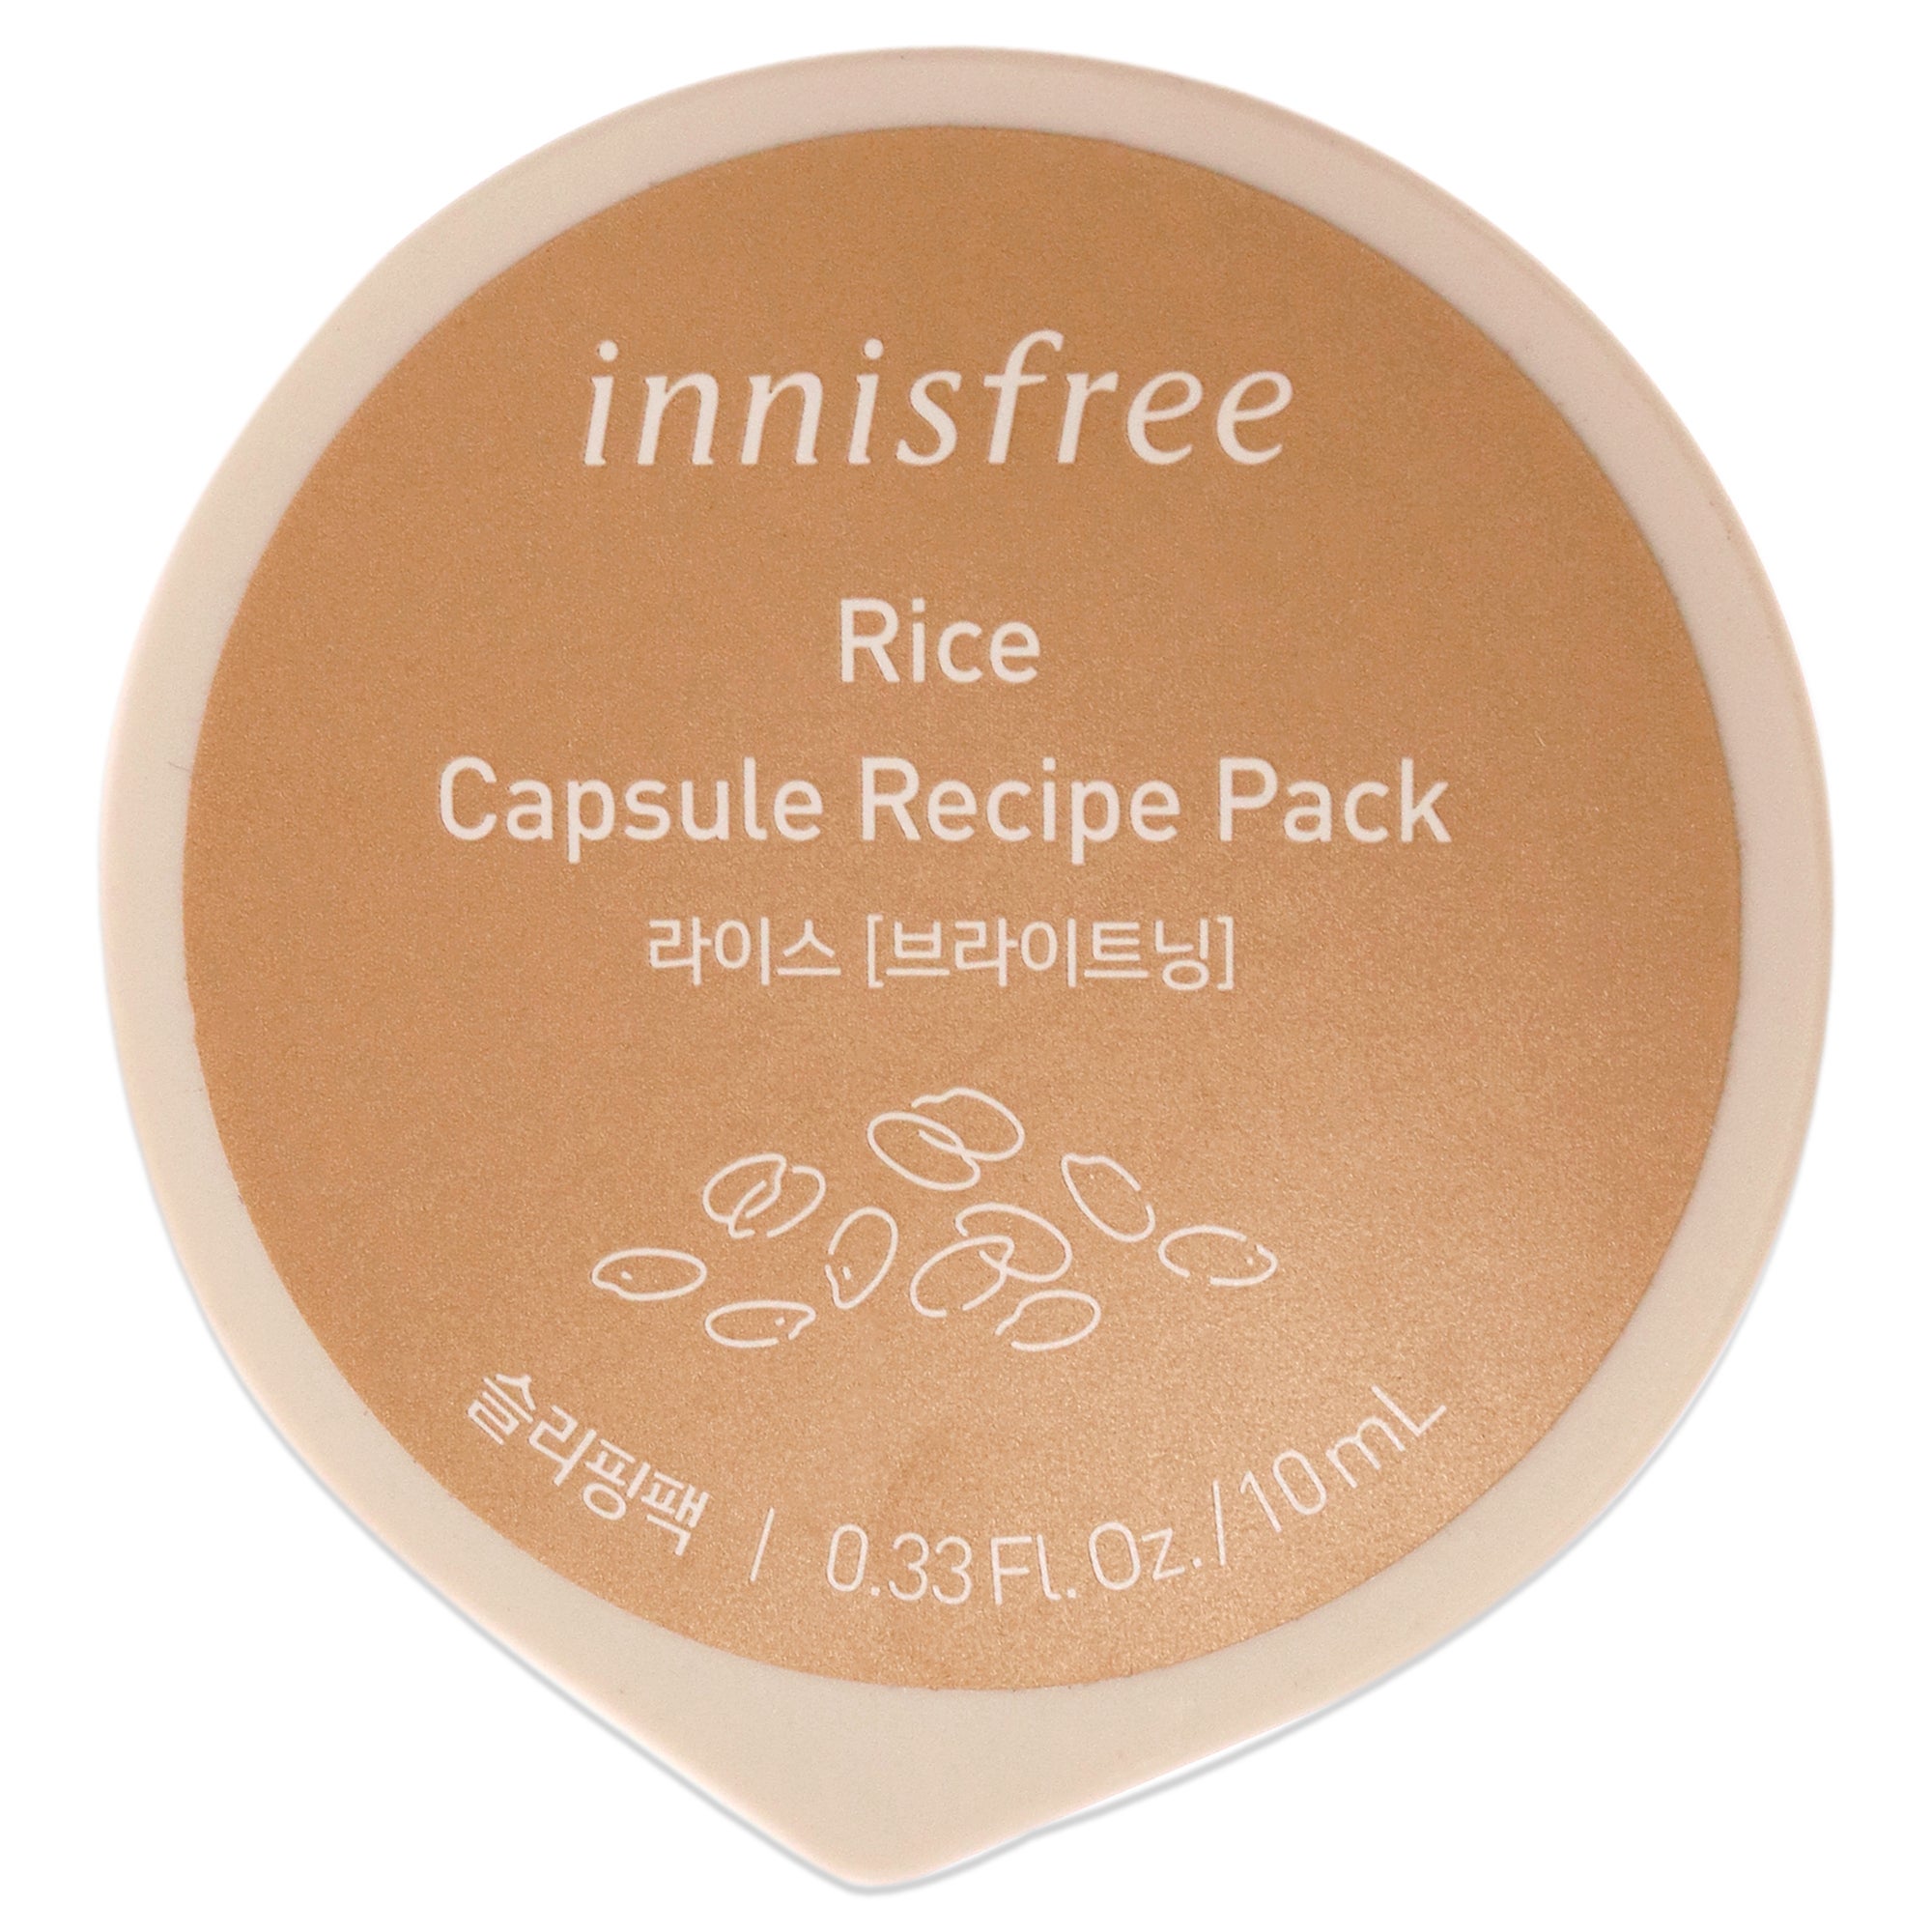 Capsule Recipe Pack Mask - Rice by Innisfree for Unisex - 0.33 oz Mask